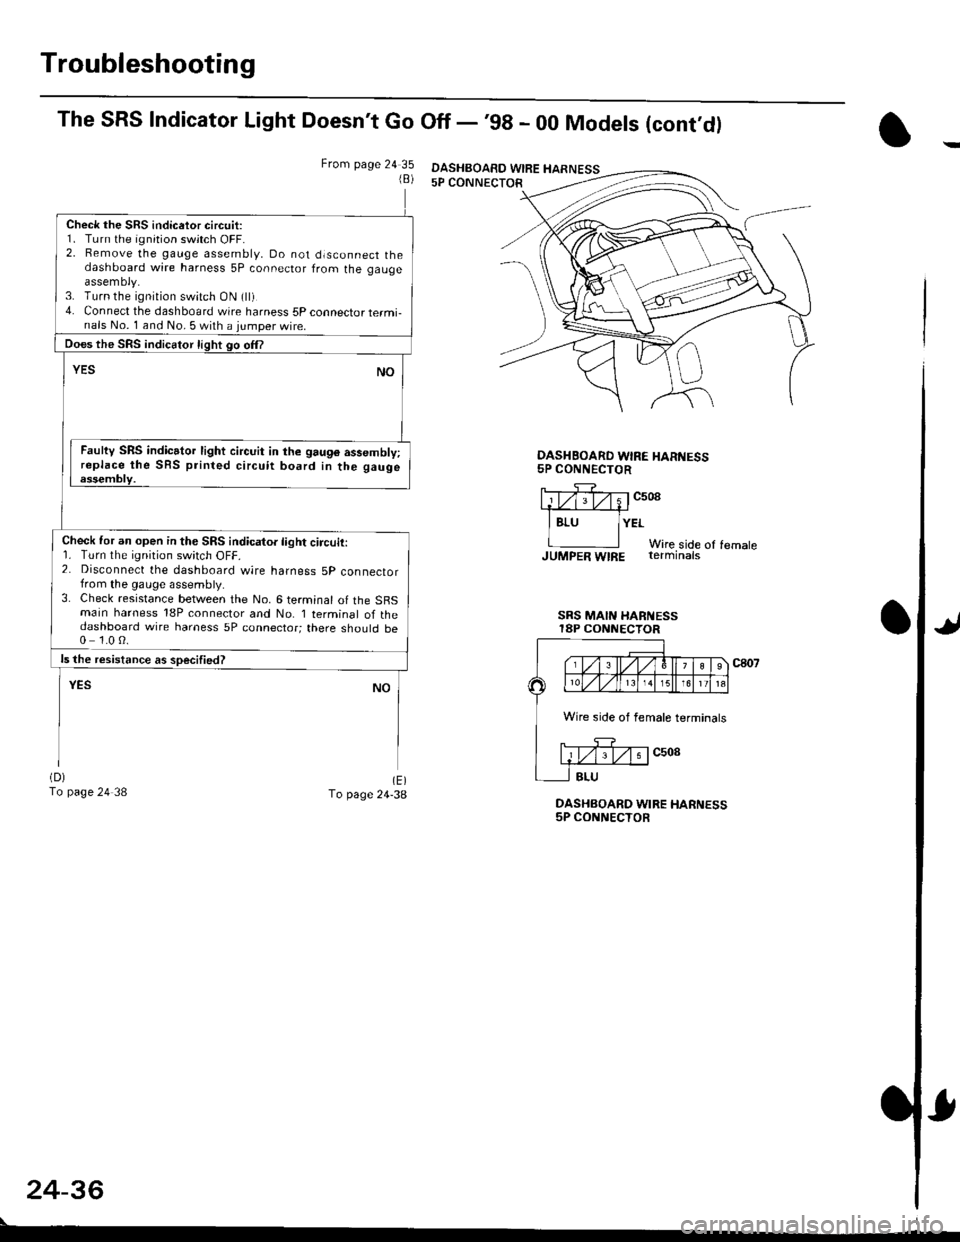 HONDA CIVIC 1998 6.G Owners Guide Troubleshooting
The SRS Indicator Light Doesnt Go Off - 98 - 00 Models (cont,dl
From page 24 351B)
Check the SRS indicetor circuit:1. Turn the ignition switch OFF.2. Bemove the gauge assembly, Do no